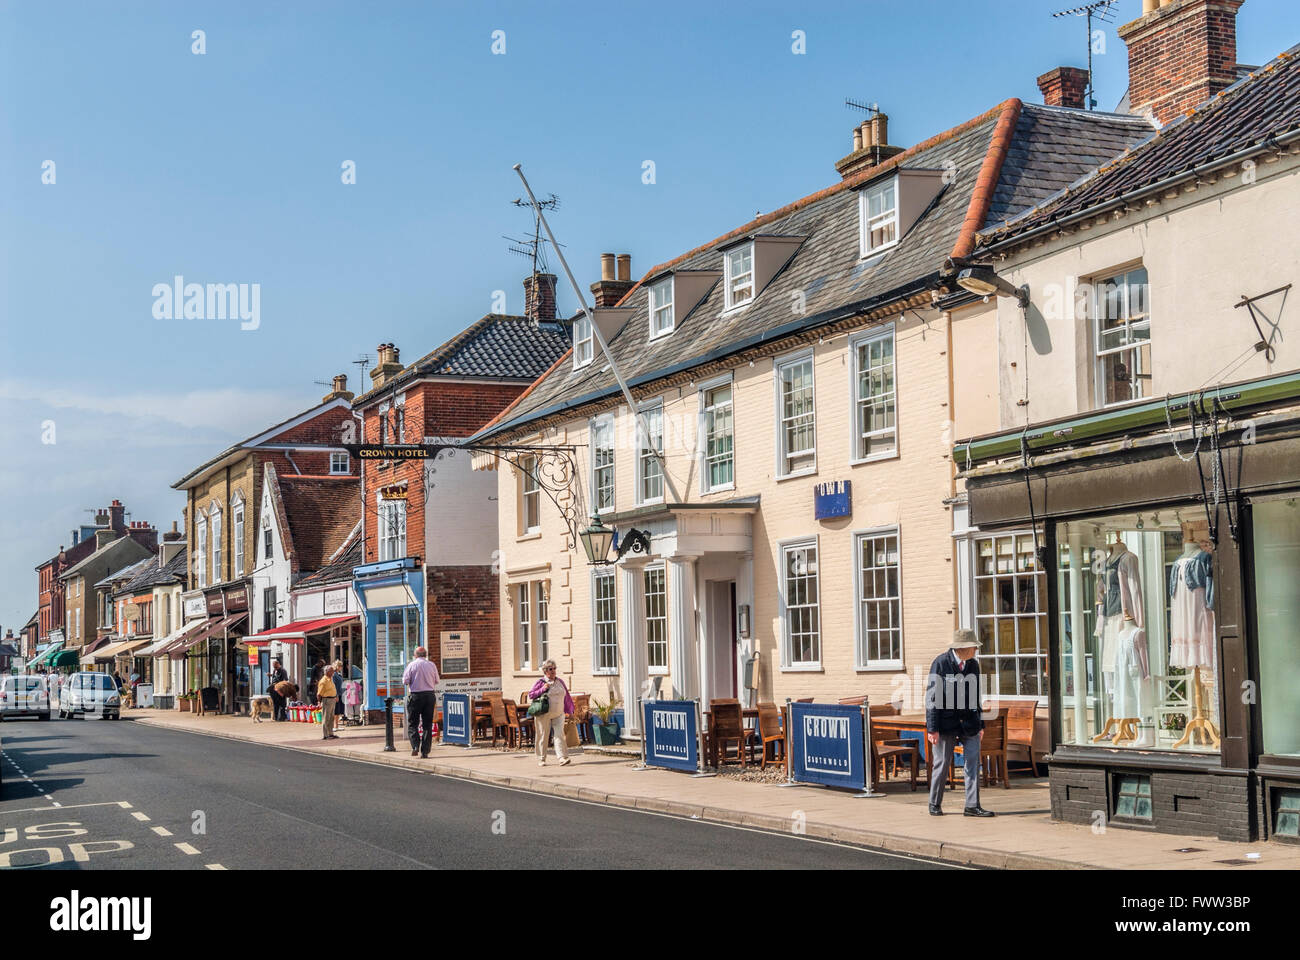 Town centre of Southwold, a town on the North Sea coast, in the Waveney district of Suffolk, East Anglia, England. Stock Photo